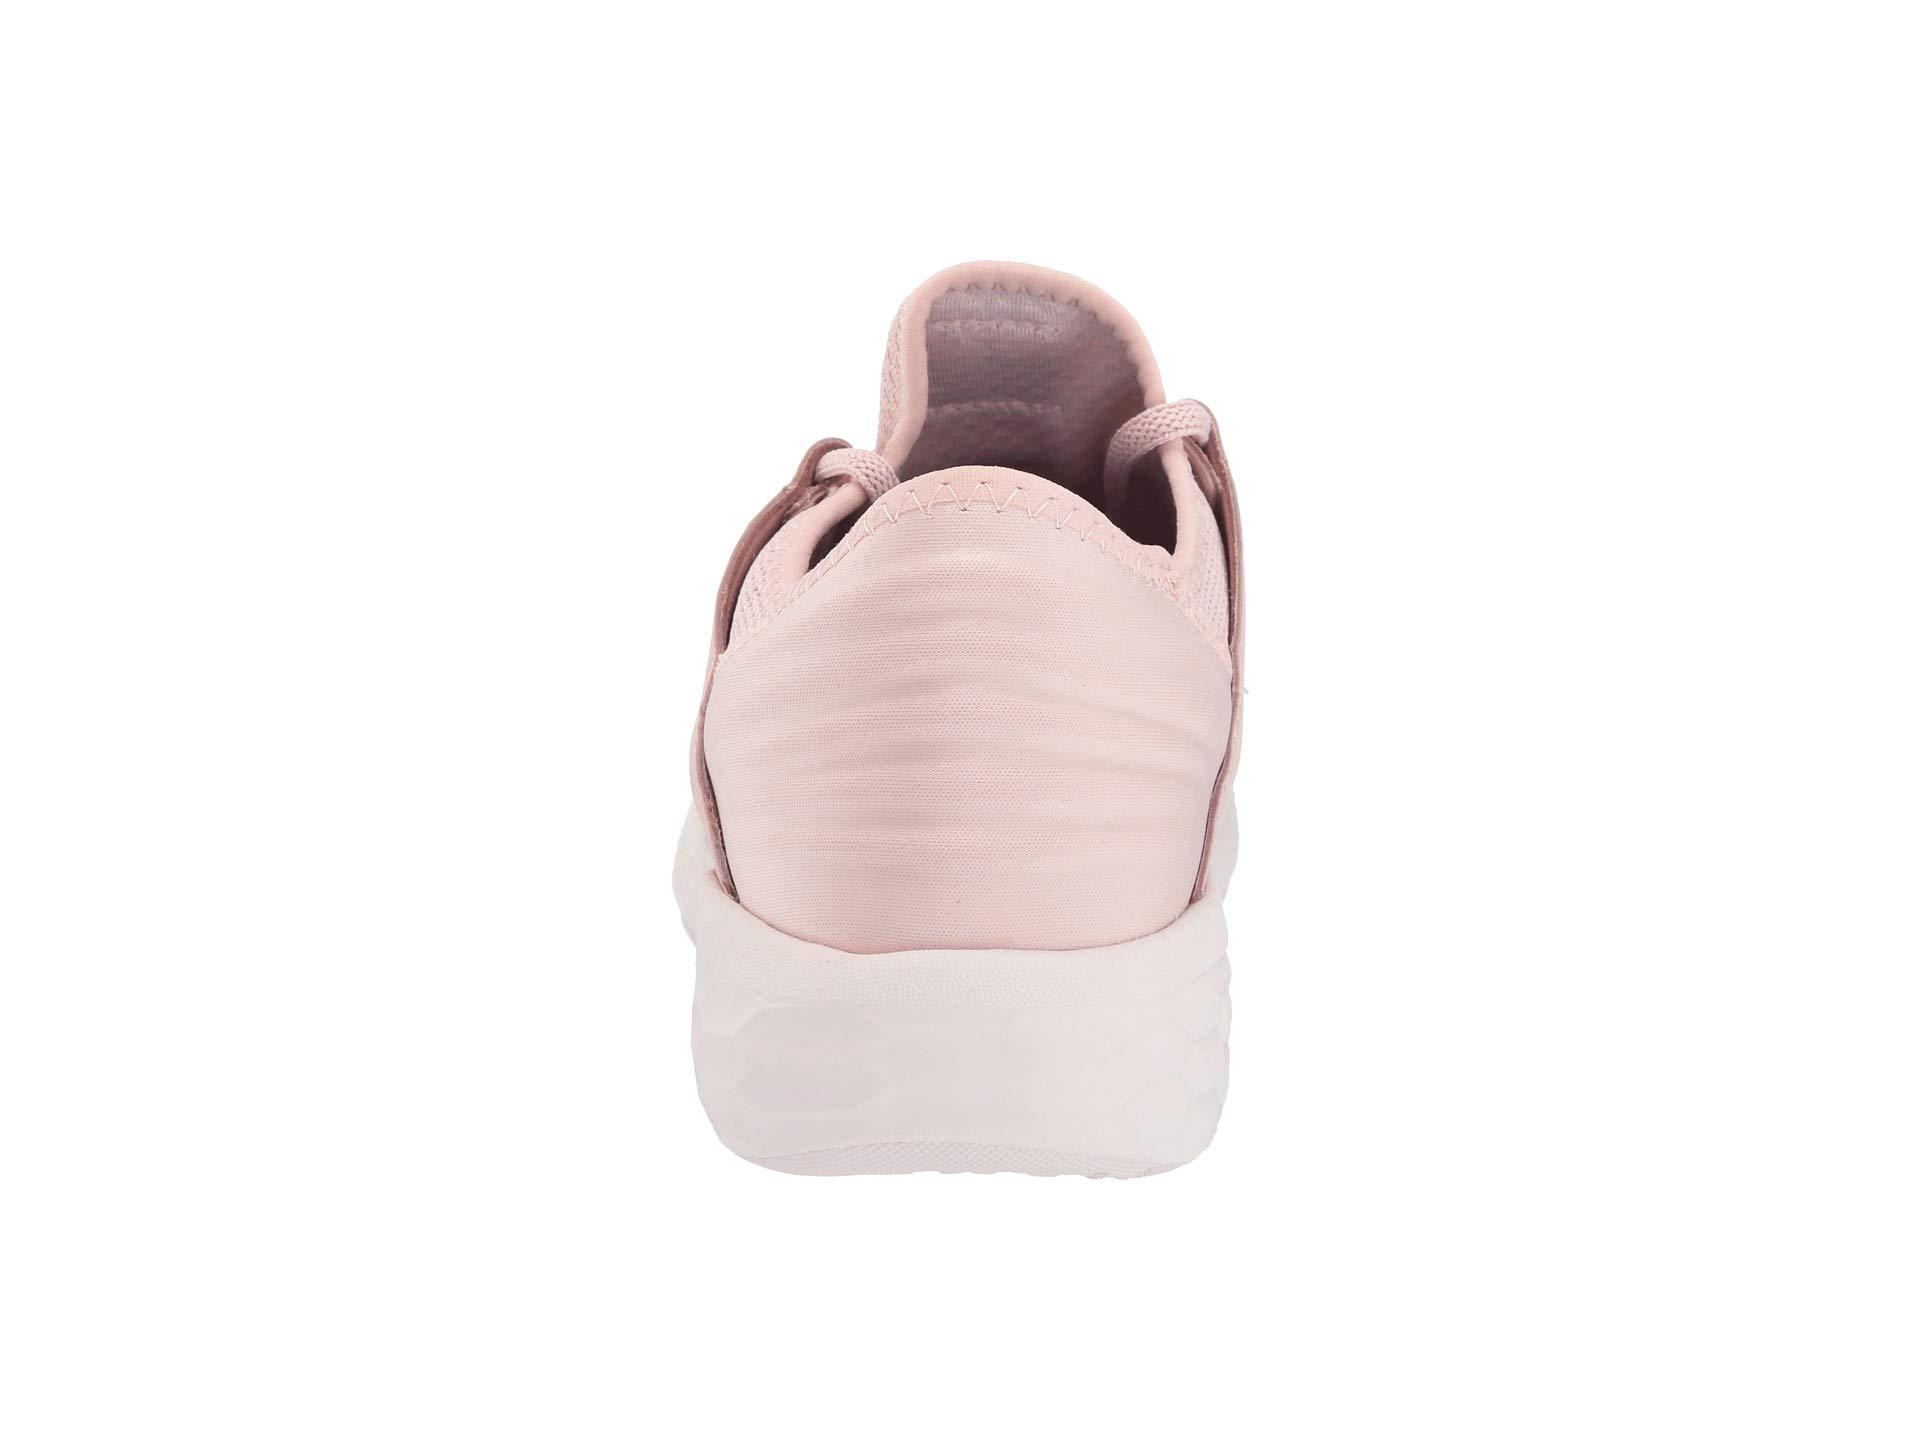 New Balance Leather Fresh Foam Cruz V2 Deconstructed Running Shoes in Pink  - Save 45% - Lyst